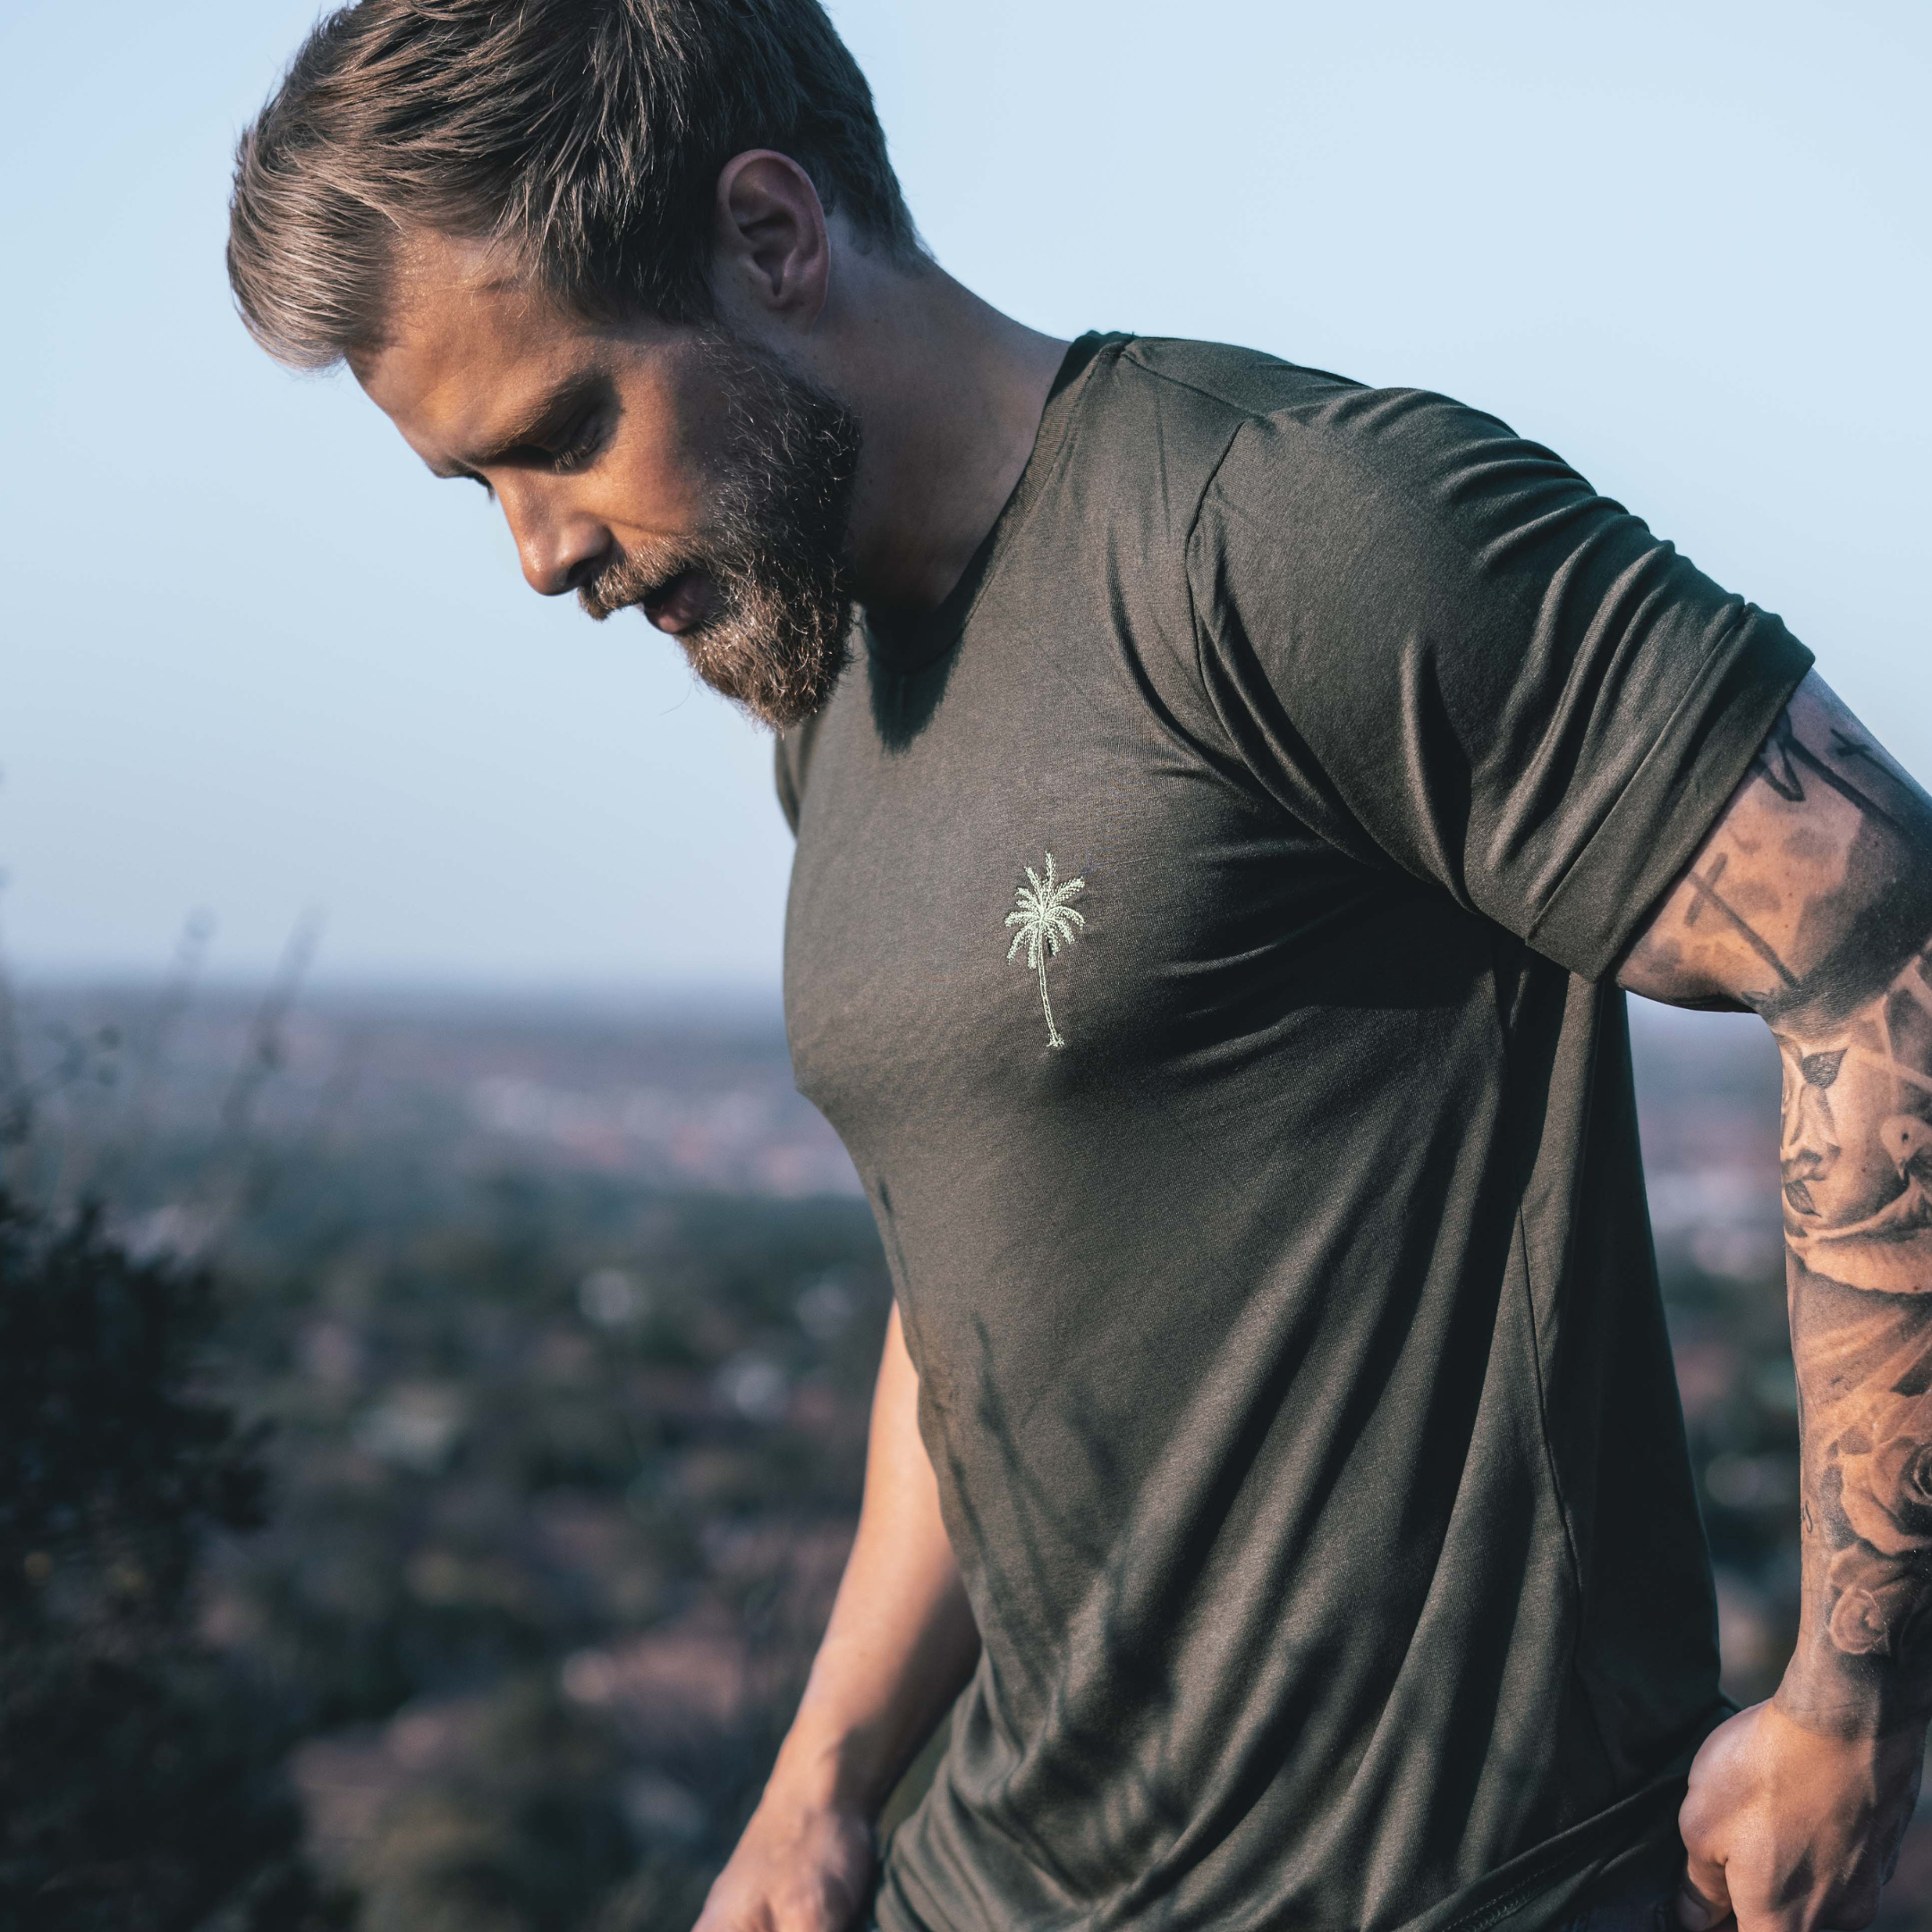 Rolled Muscle Tee - SageStrange ParadiseStrange Paradise
Our Rolled Muscle Tees are designed for everyday wear. Our fabric delivers a product for those with a demanding and versatile lifestyle. From the workplace or gym, Rolled Muscle Tee - Sage